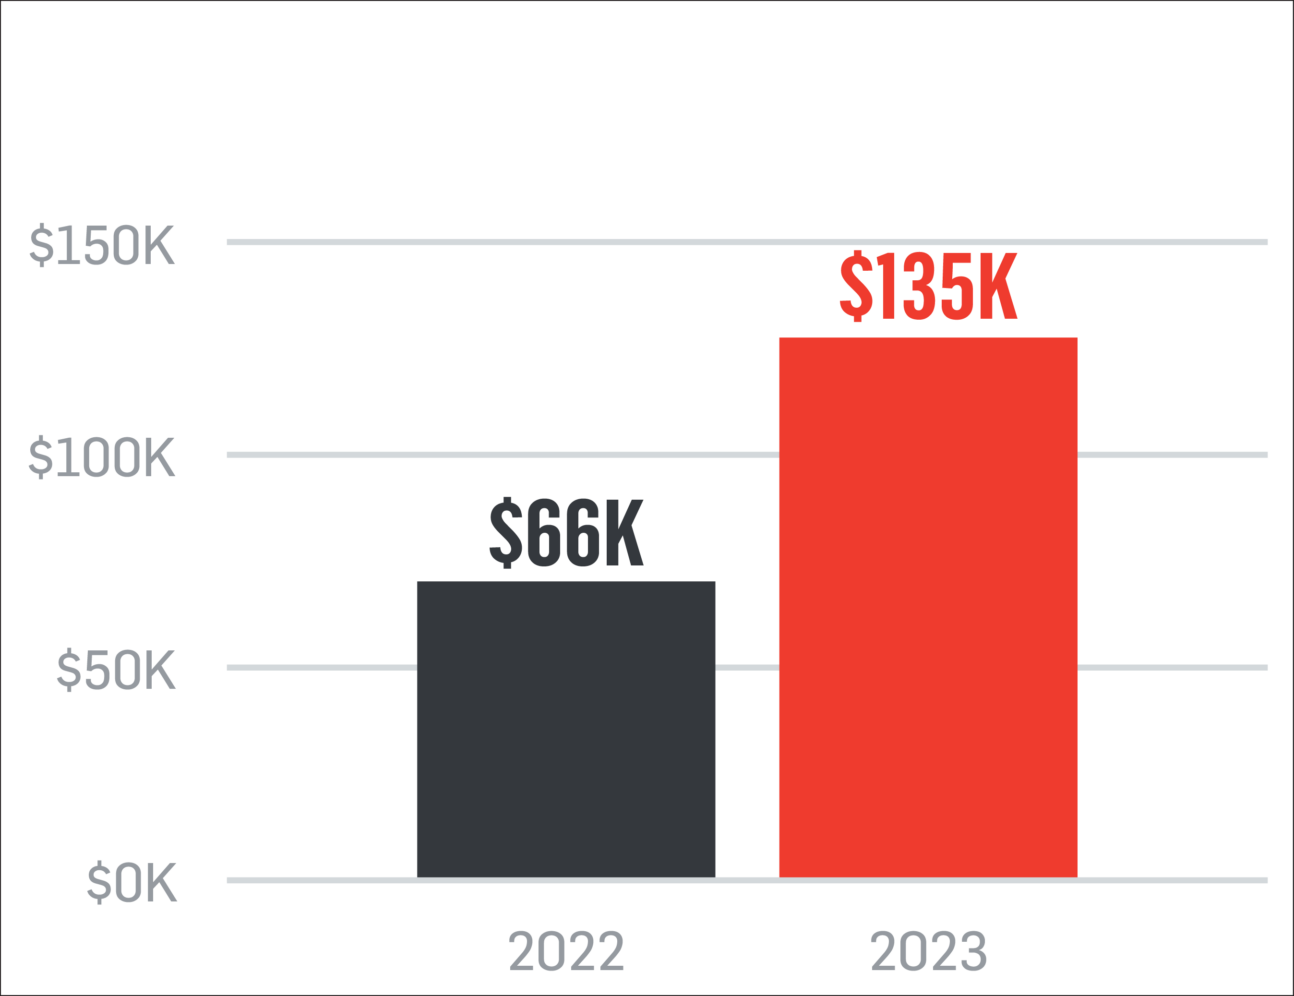 Bar chart showing increase in revenue for $66,000 in 2022 to $135,000 in 2023